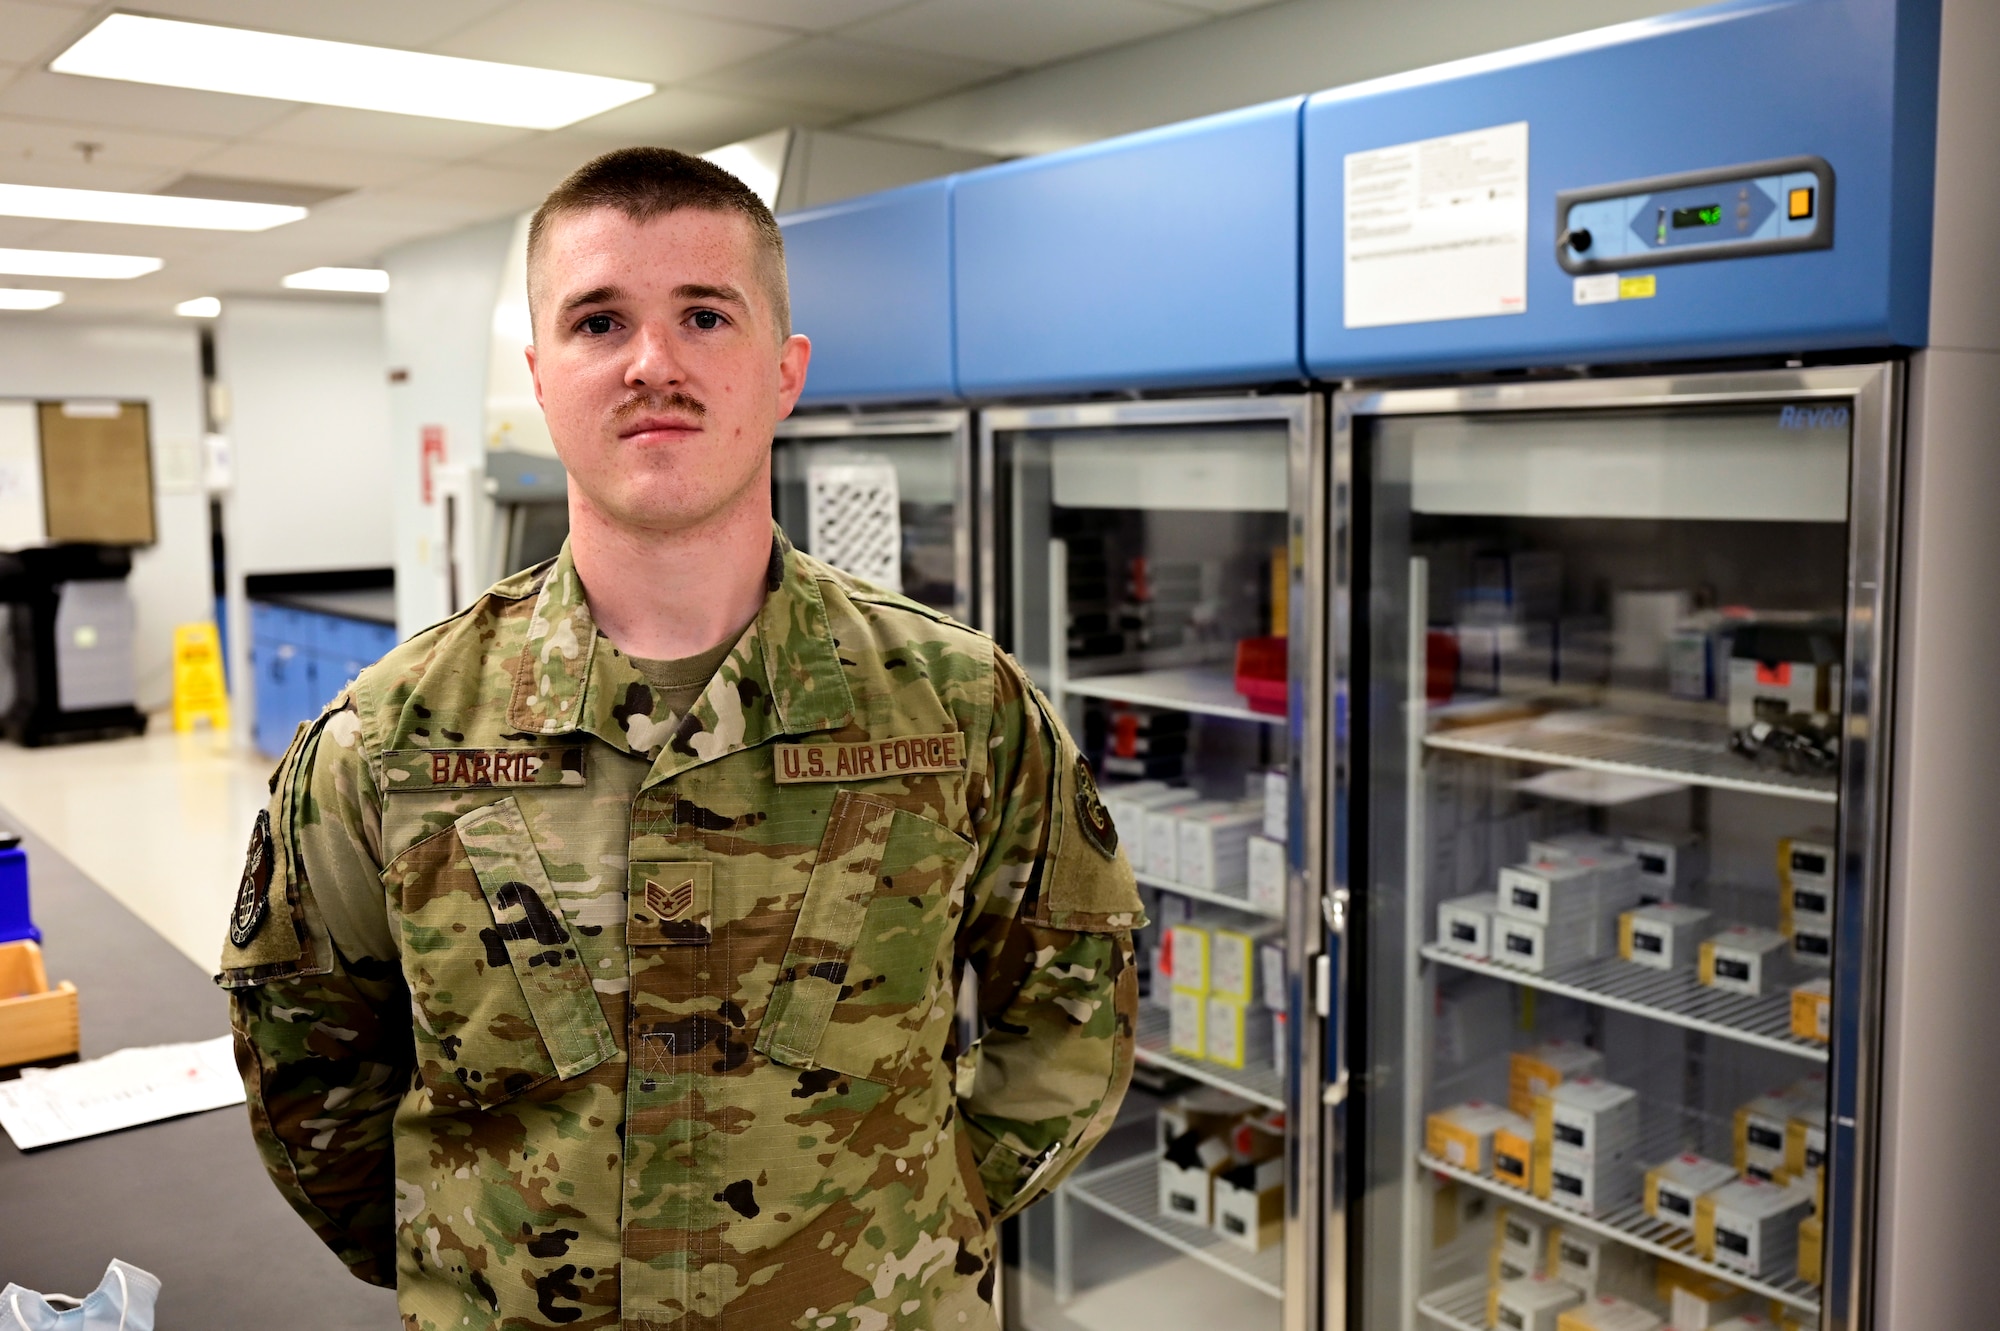 An Airman poses for a photo in front of a medical freezer.